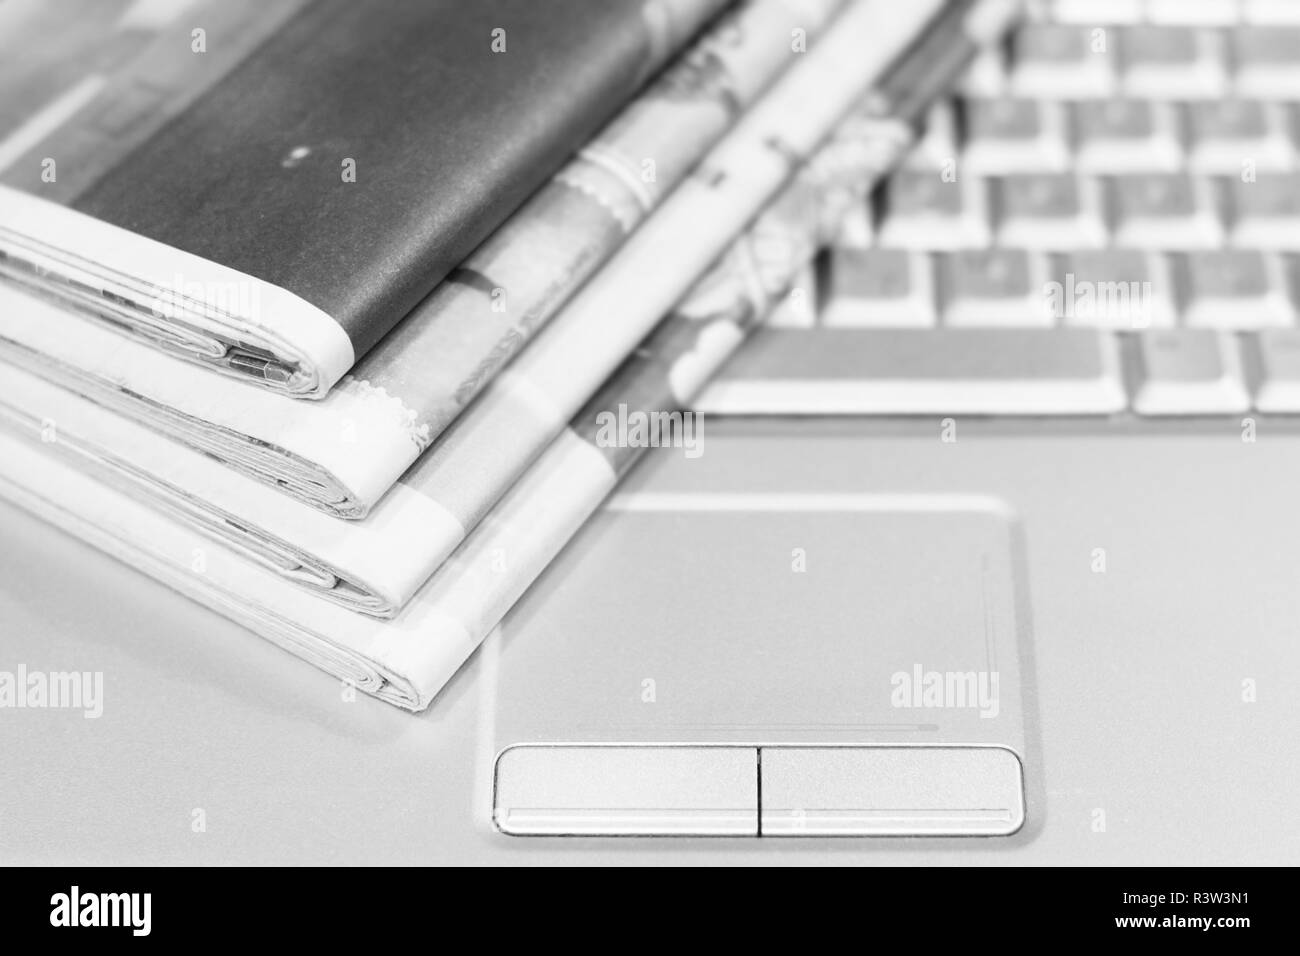 Newspaper and laptop. Pile of daily papers with news on the computer. Pages with headlines, articles folded and stacked on keypad of electronic device Stock Photo